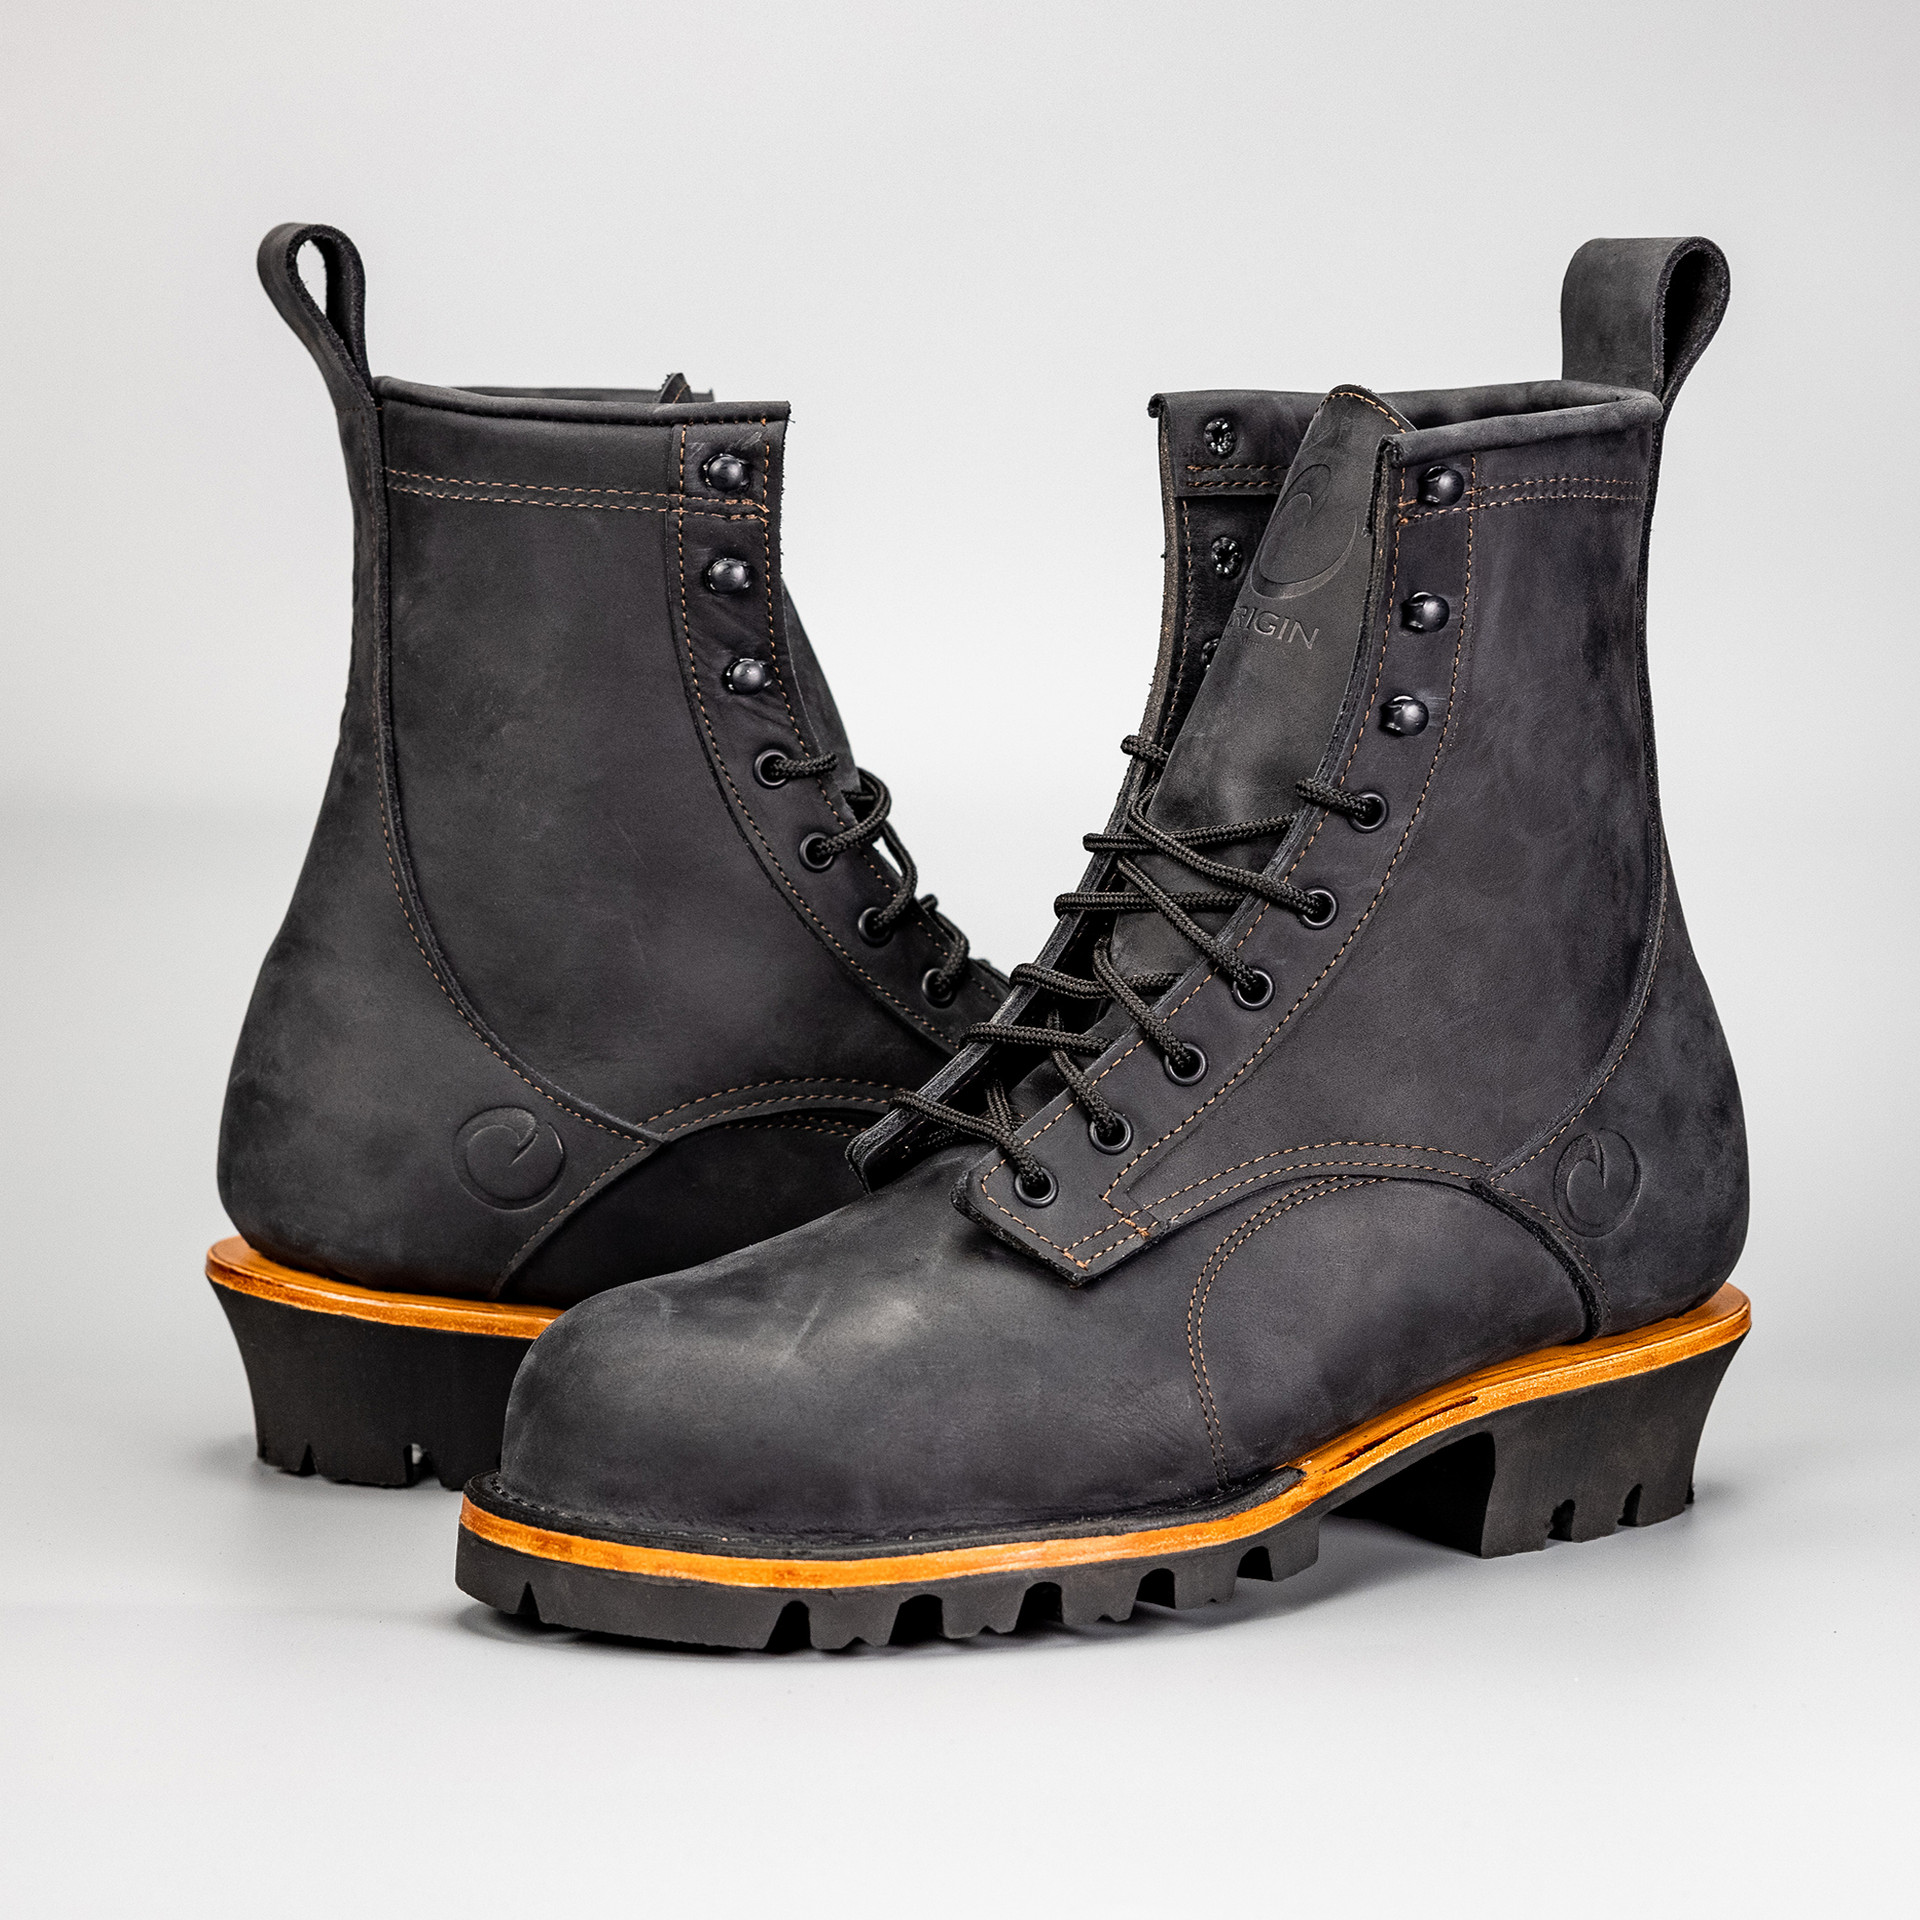 DURABLE GOODS - BOOTS - Page 1 - Origin USA